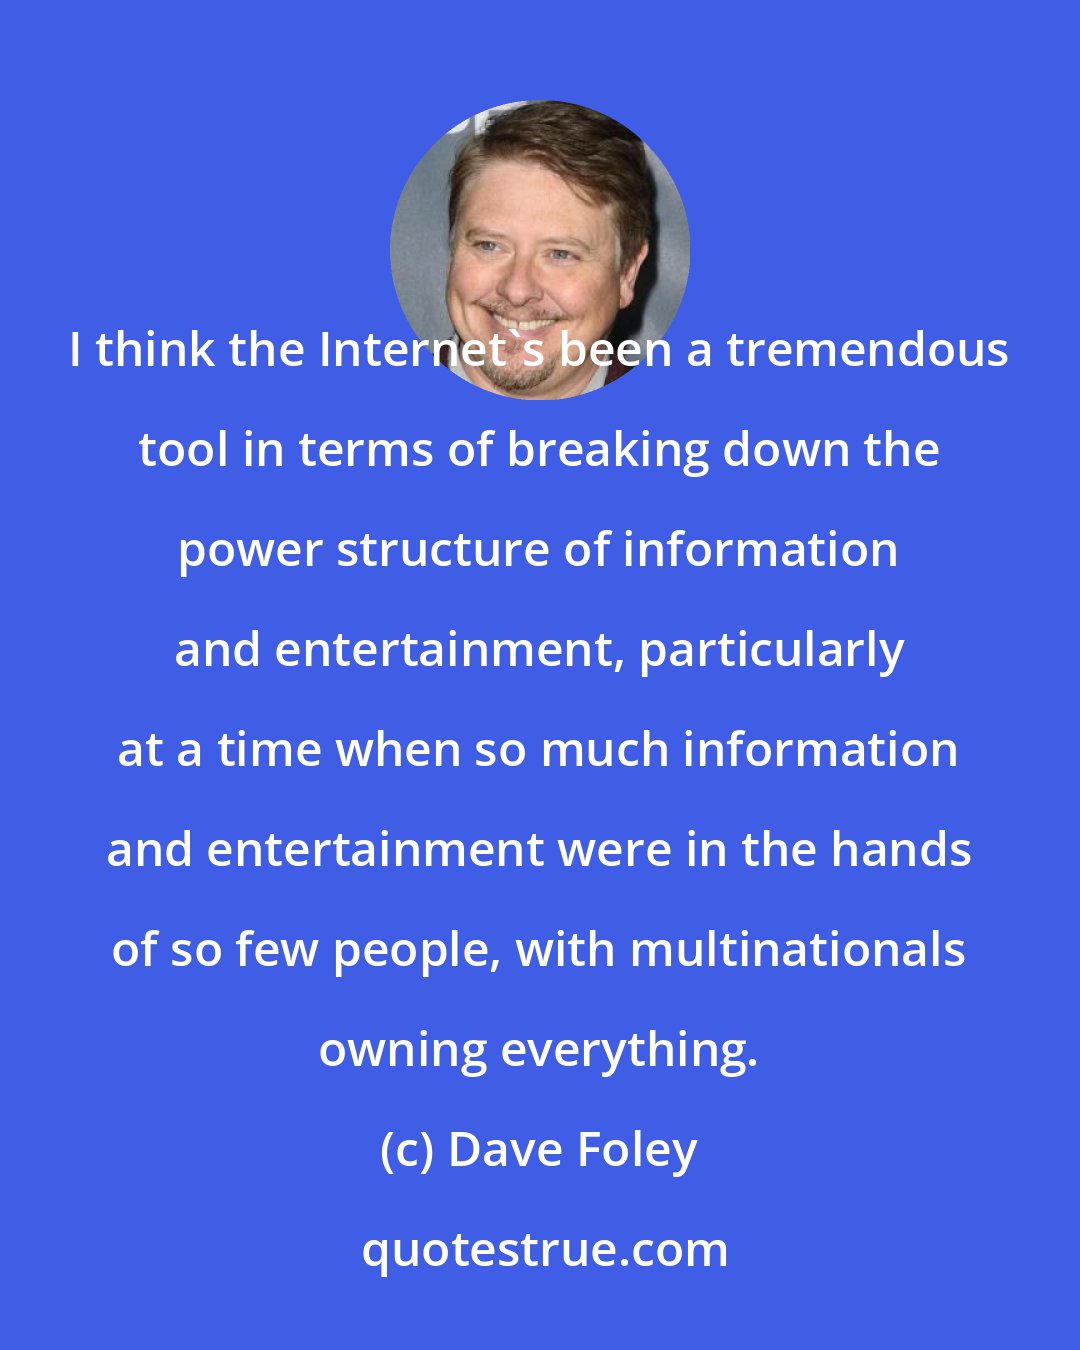 Dave Foley: I think the Internet's been a tremendous tool in terms of breaking down the power structure of information and entertainment, particularly at a time when so much information and entertainment were in the hands of so few people, with multinationals owning everything.